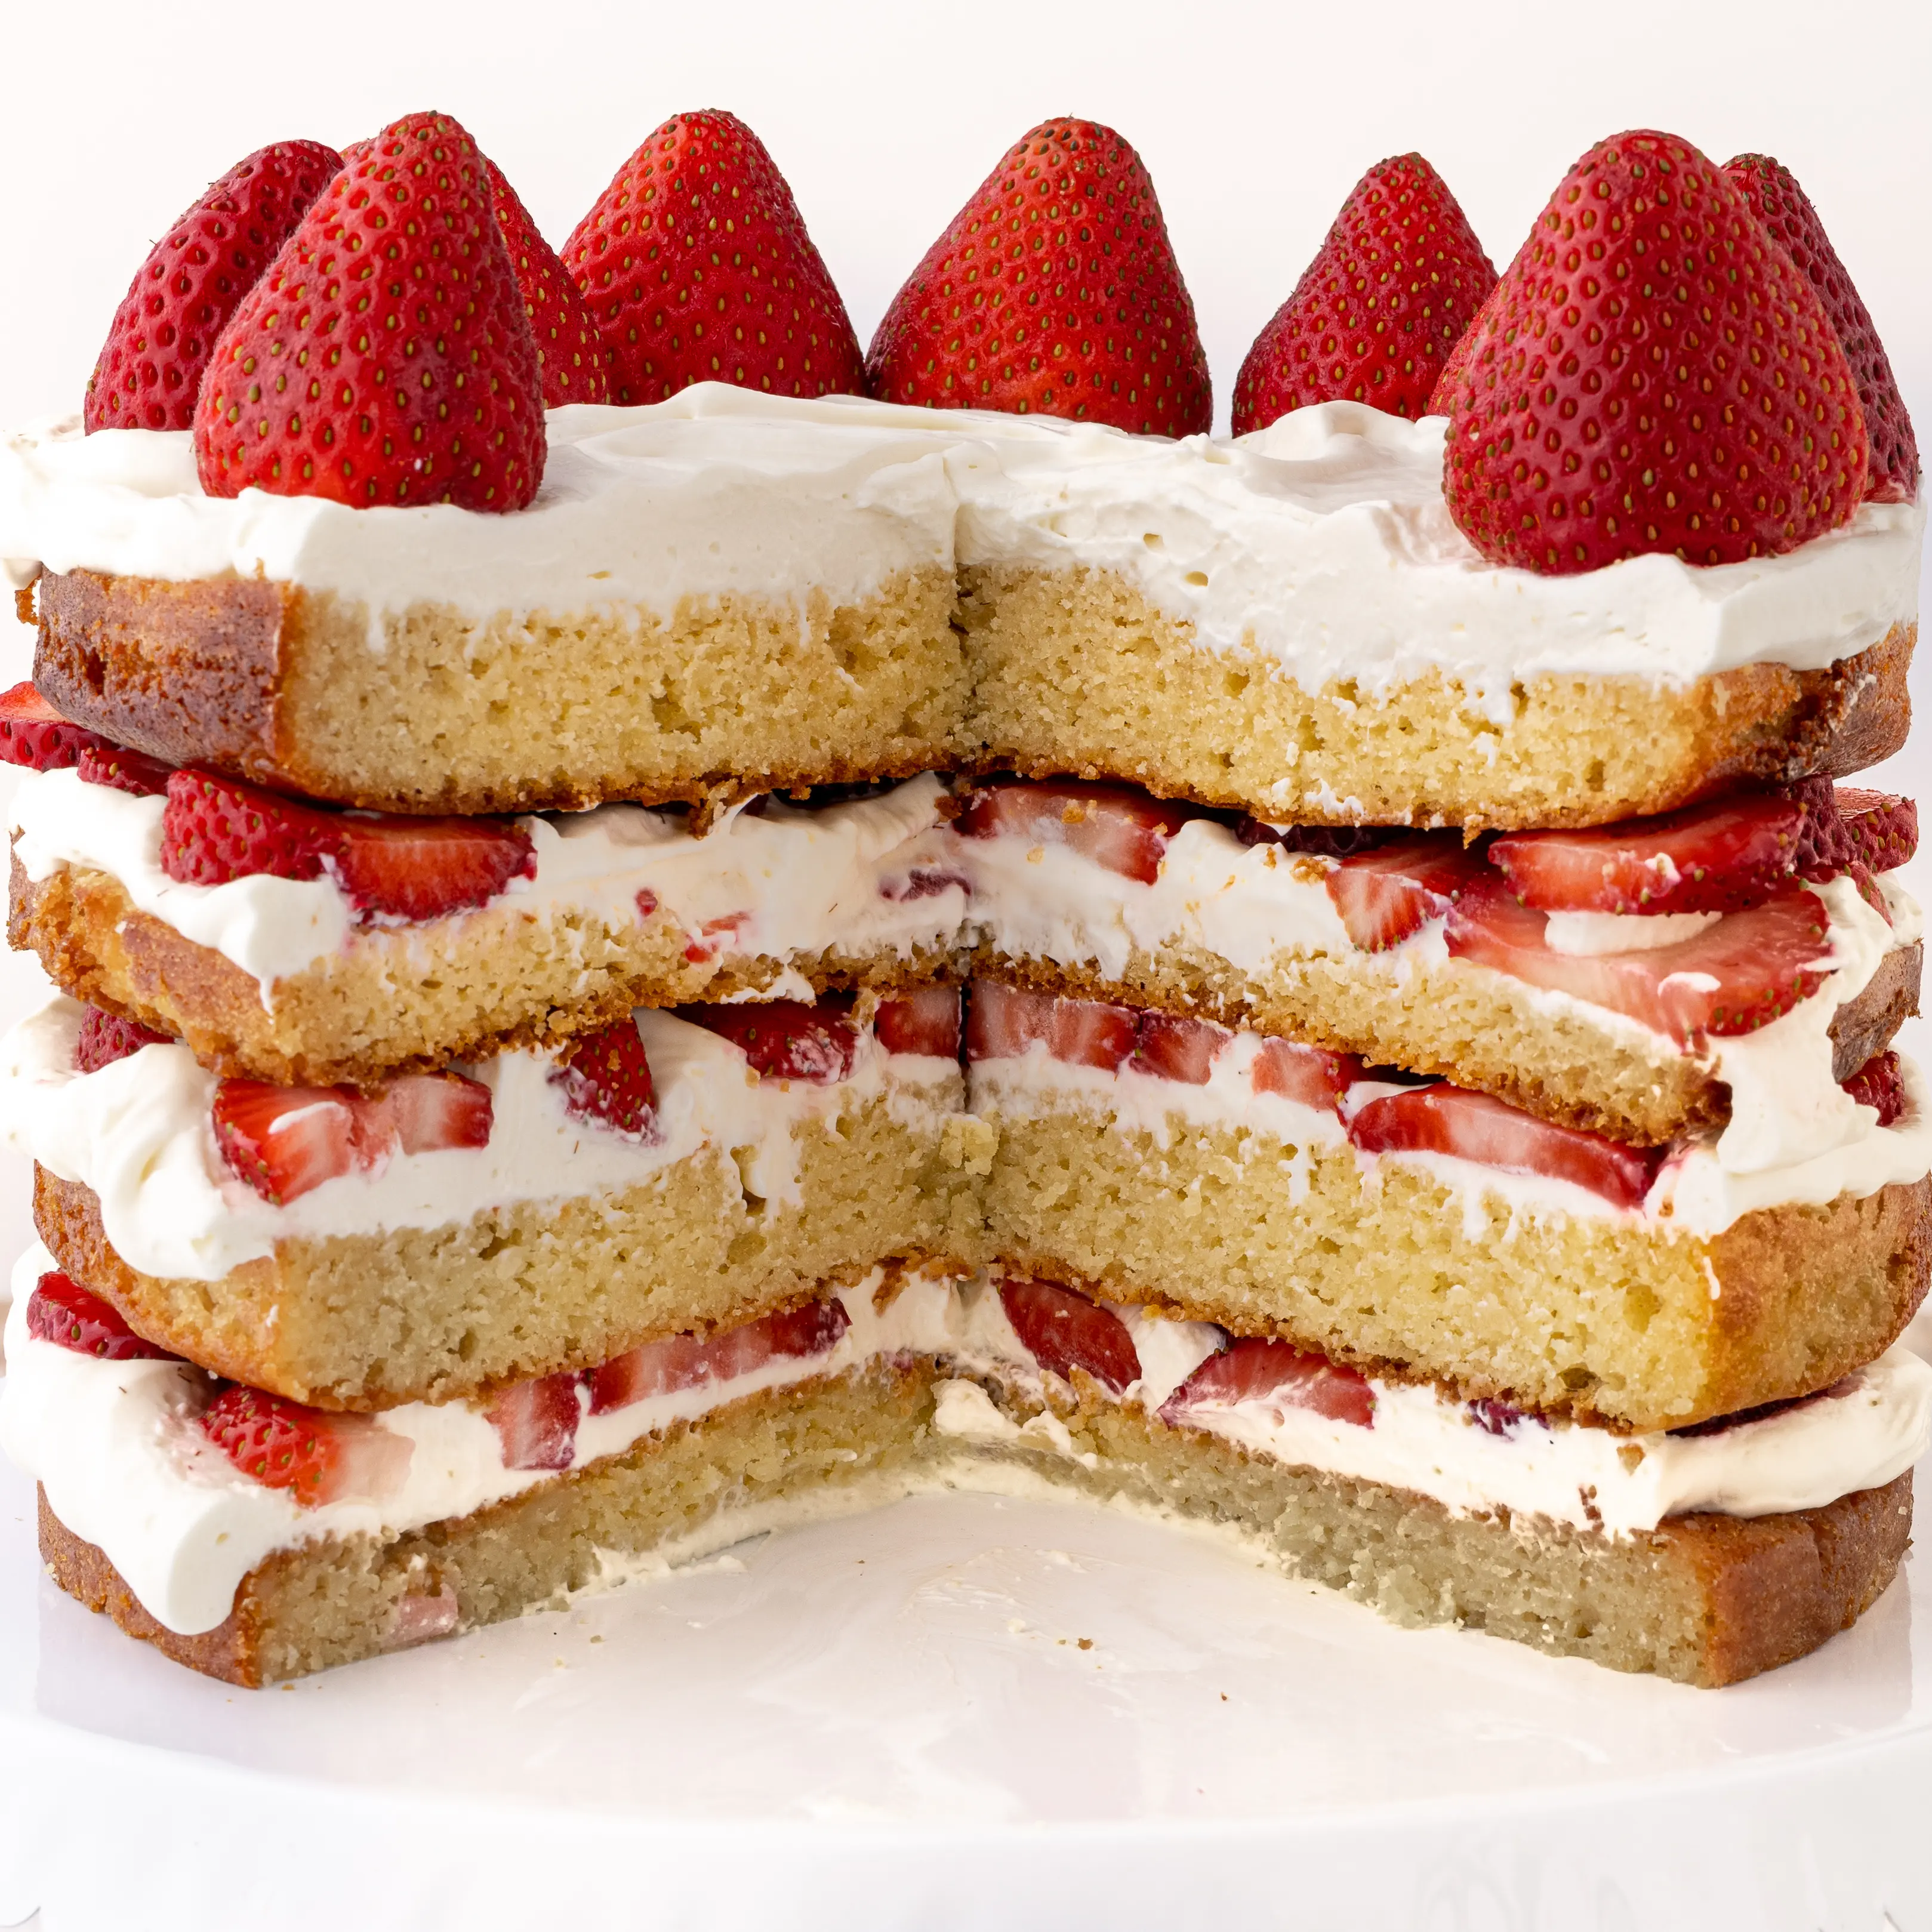 A four layer keto strawberry shortcake  sliced with fresh strawberries and whipped cream against a bright white background. 